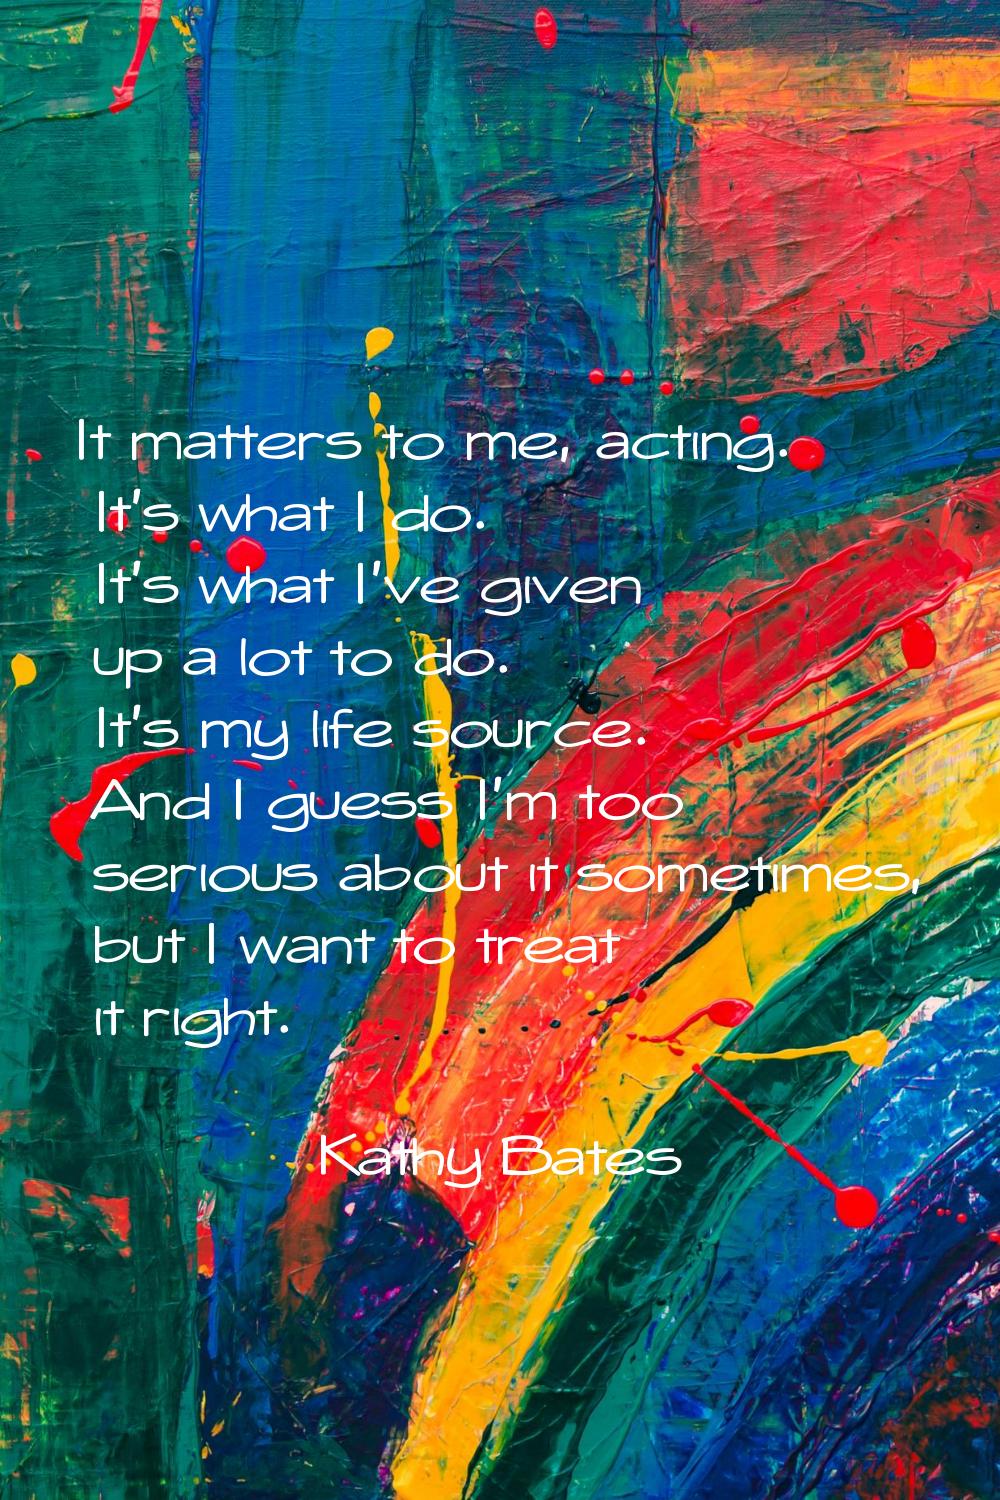 It matters to me, acting. It's what I do. It's what I've given up a lot to do. It's my life source.